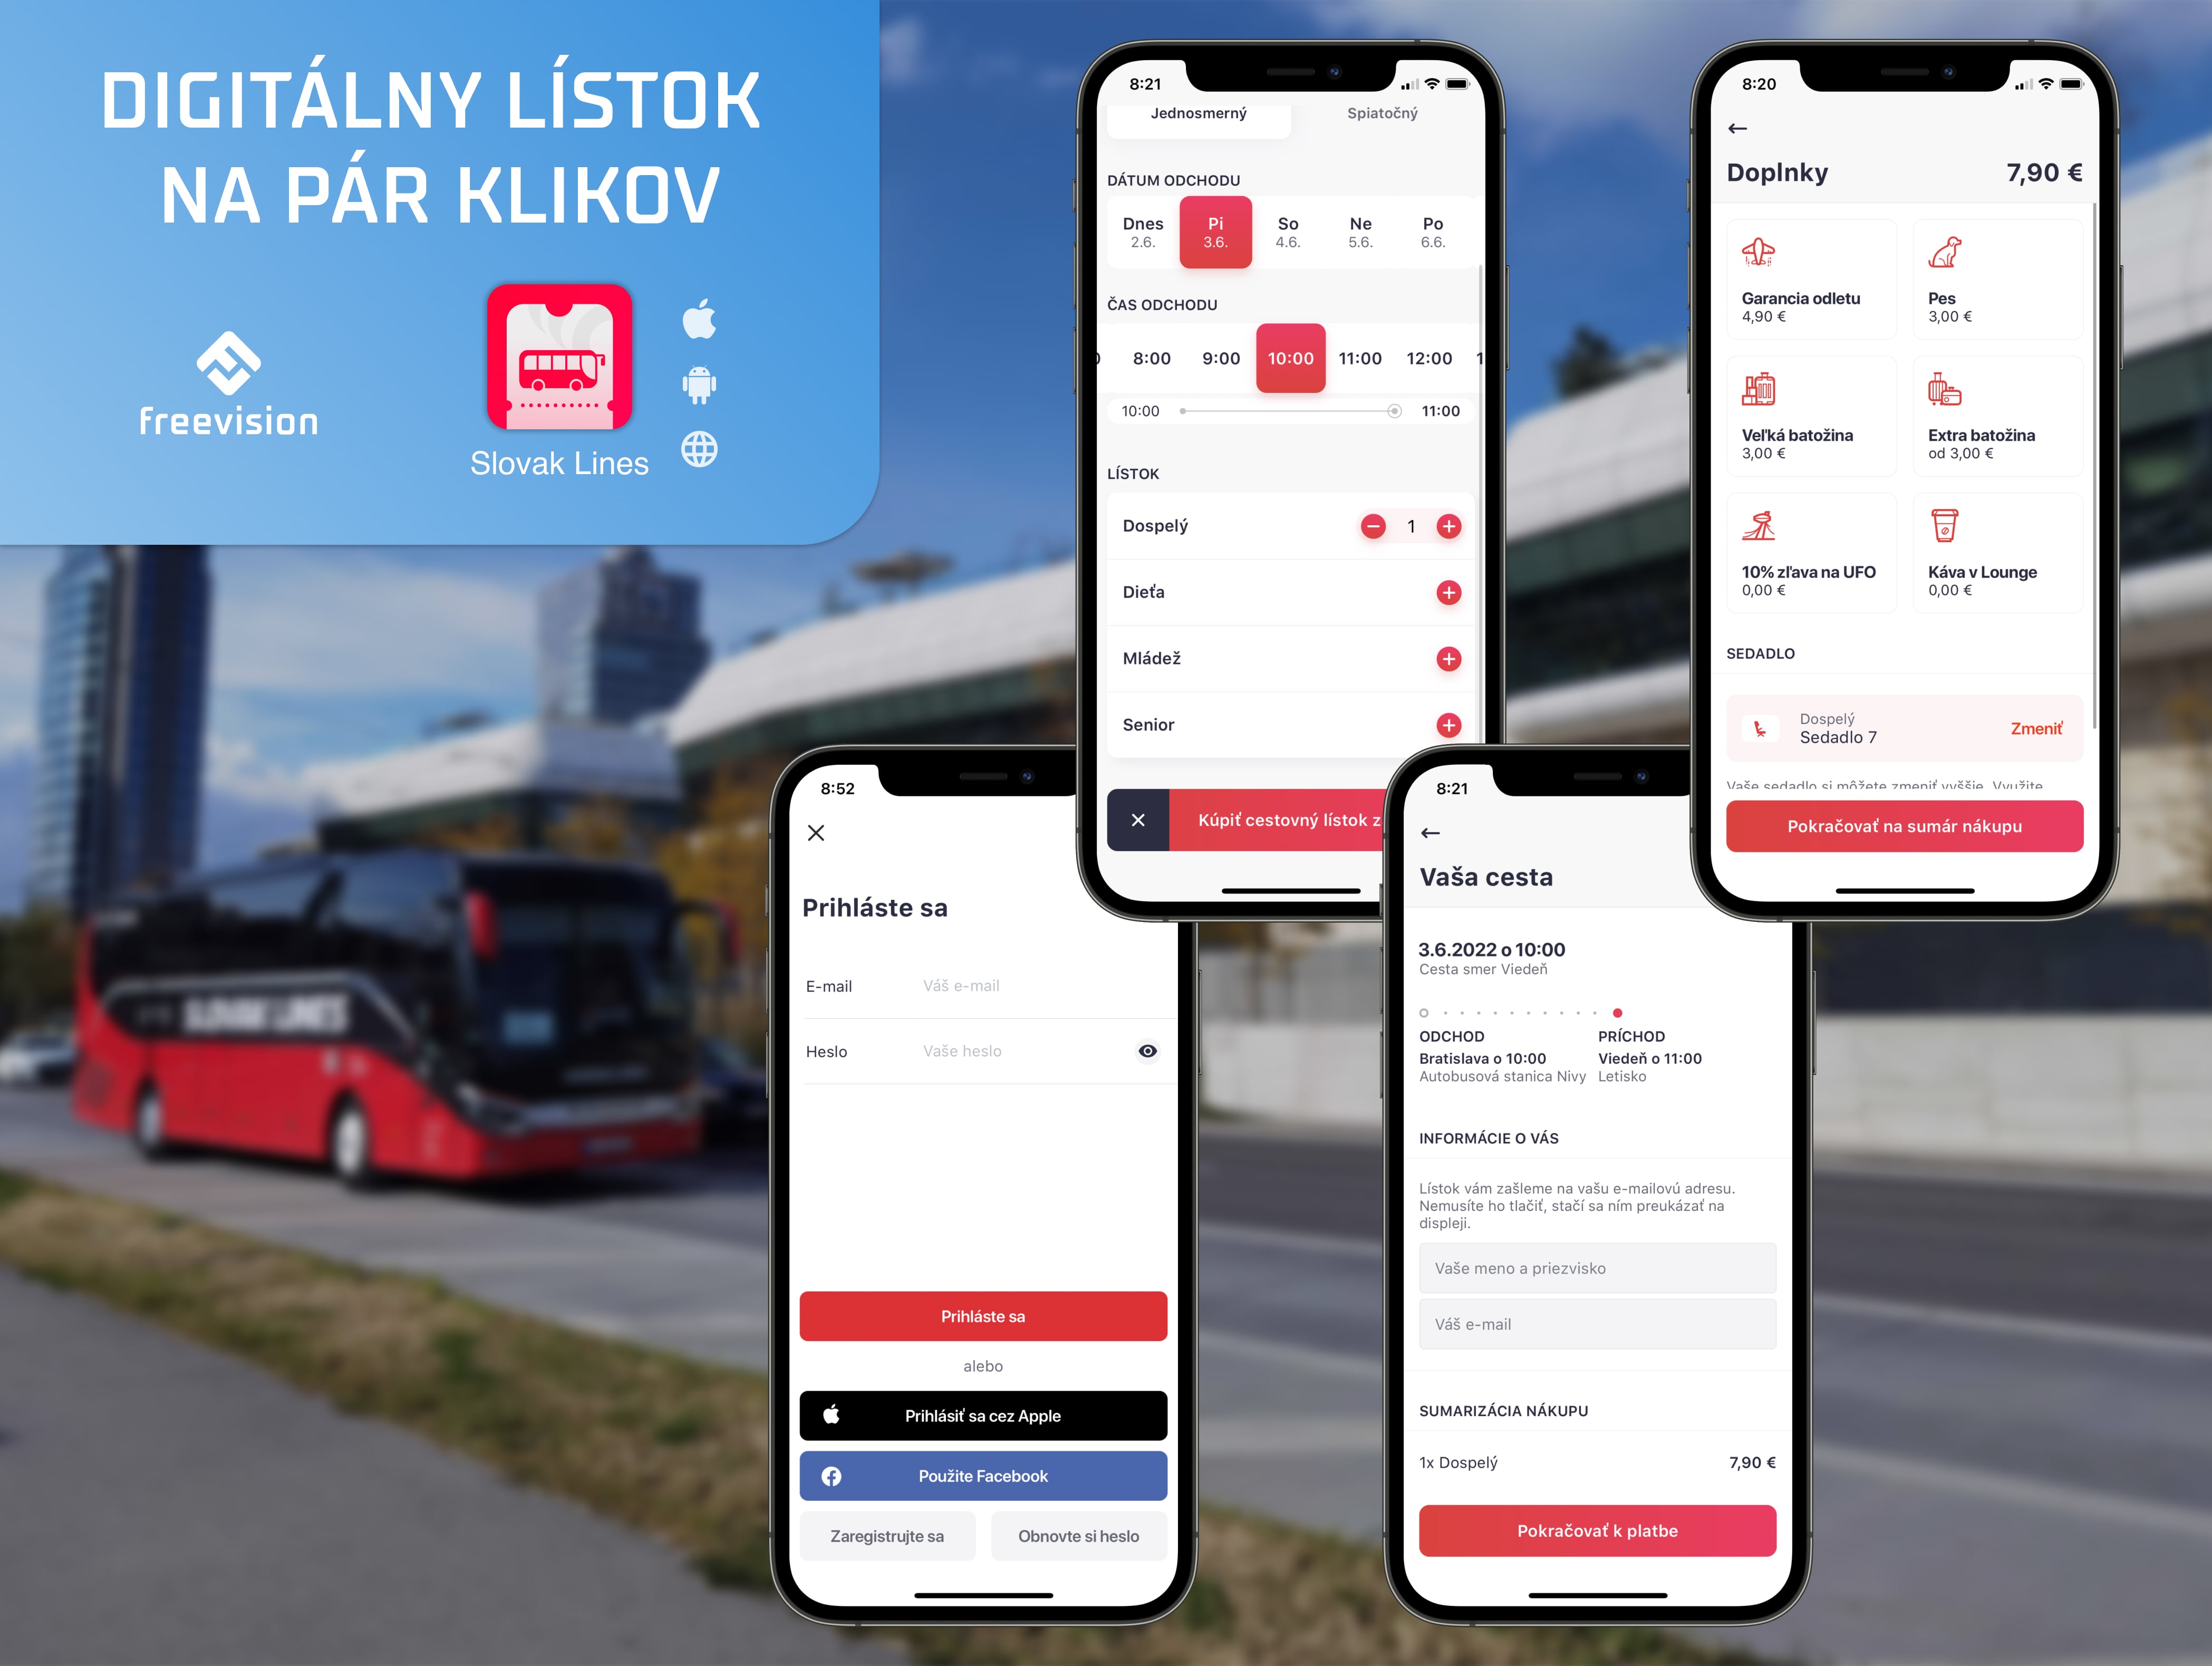 Slovak Lines application made by freevision